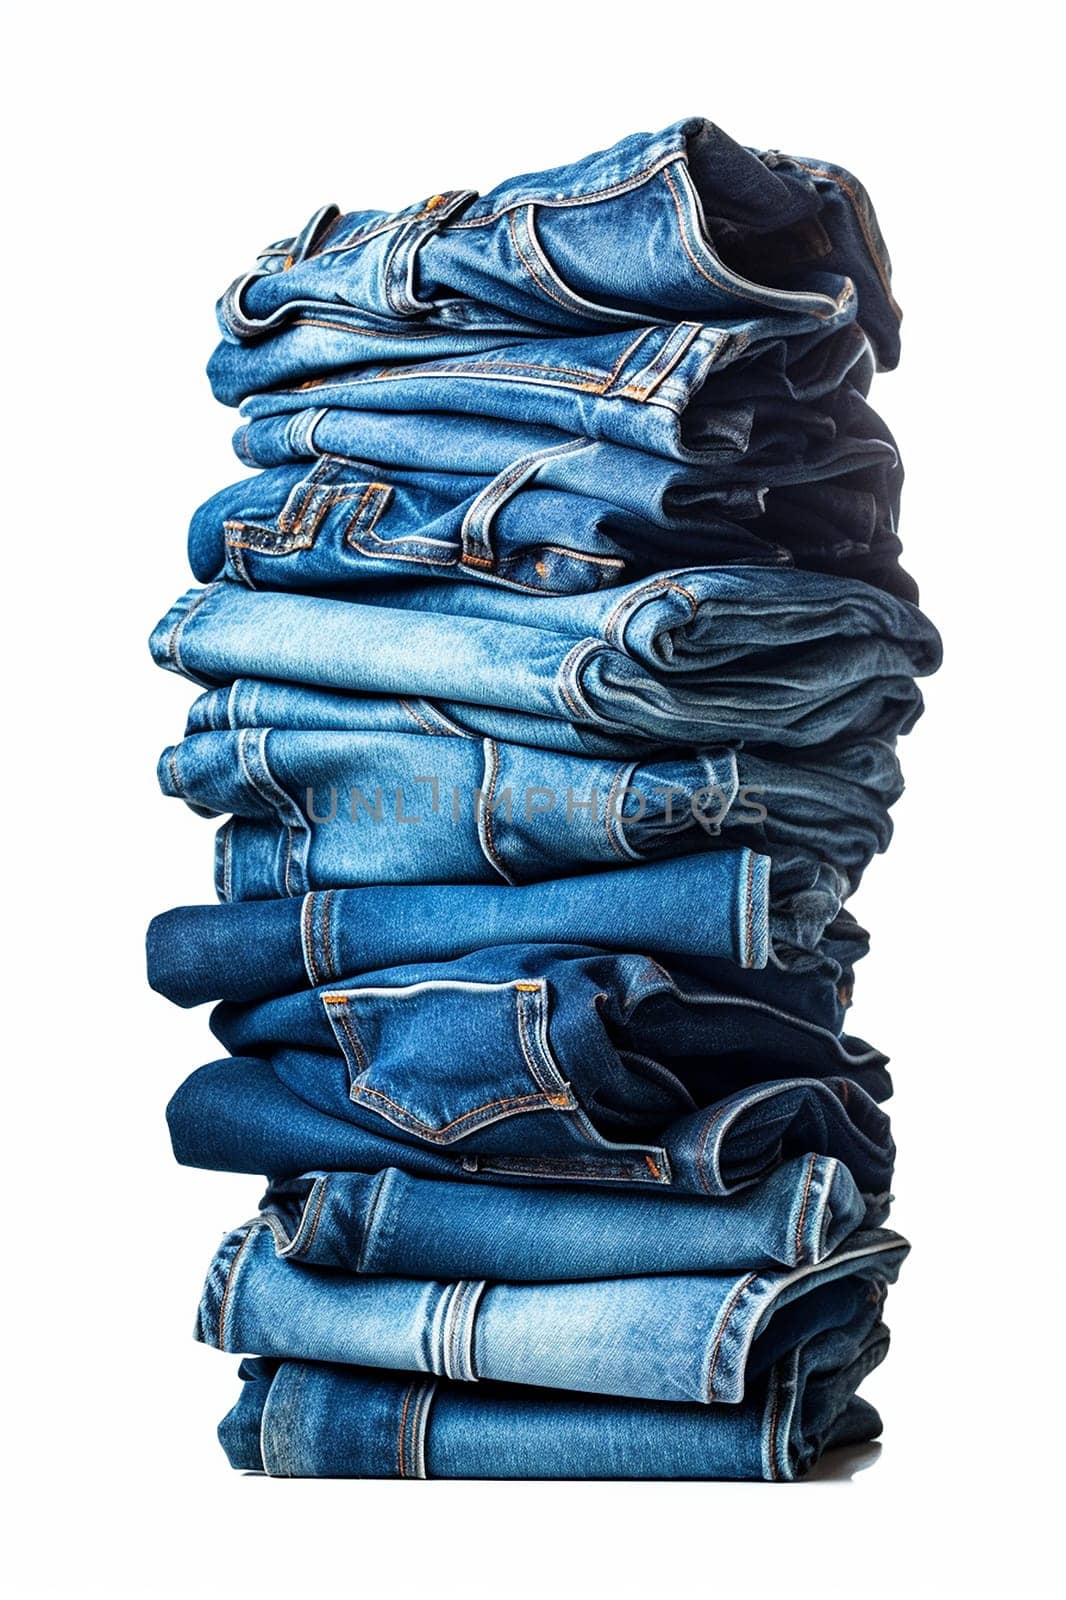 Stack of various blue denim jeans isolated on white. by Hype2art